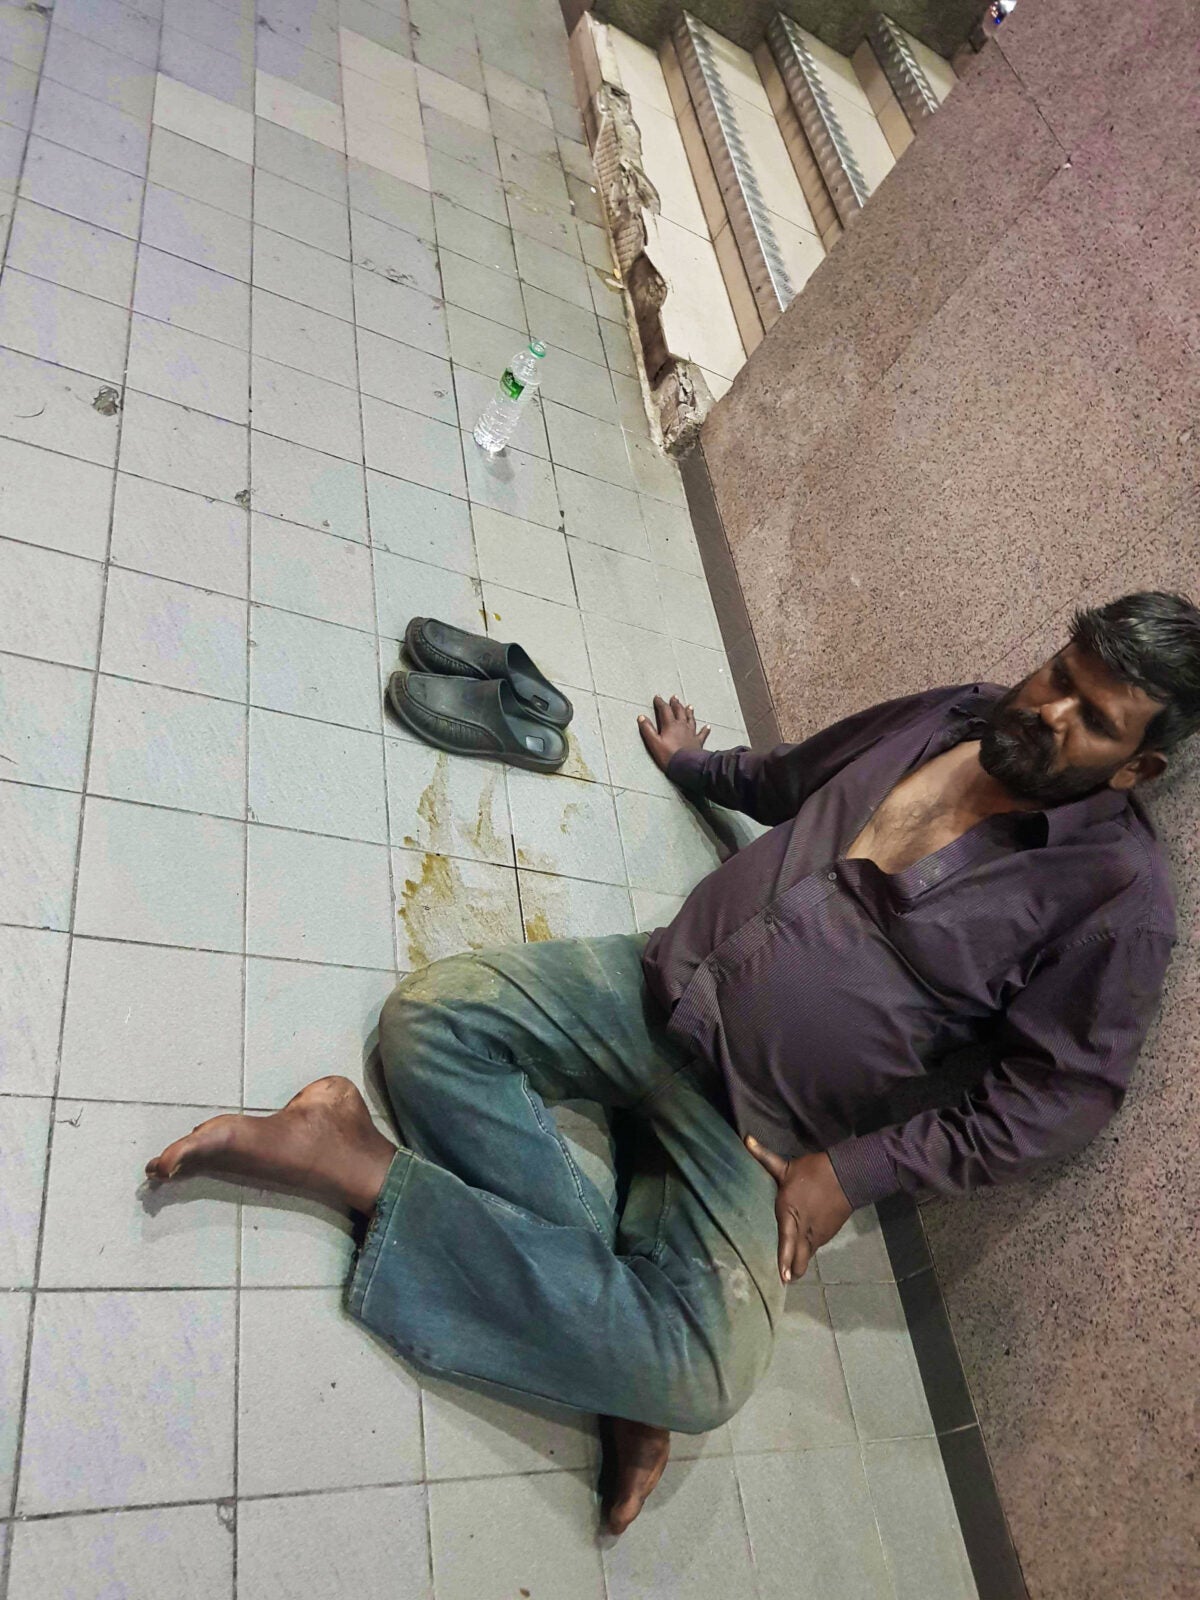 A Homeless Malaysian Man sitting on the floor which is stained with brown liquid and leaning on the wall .